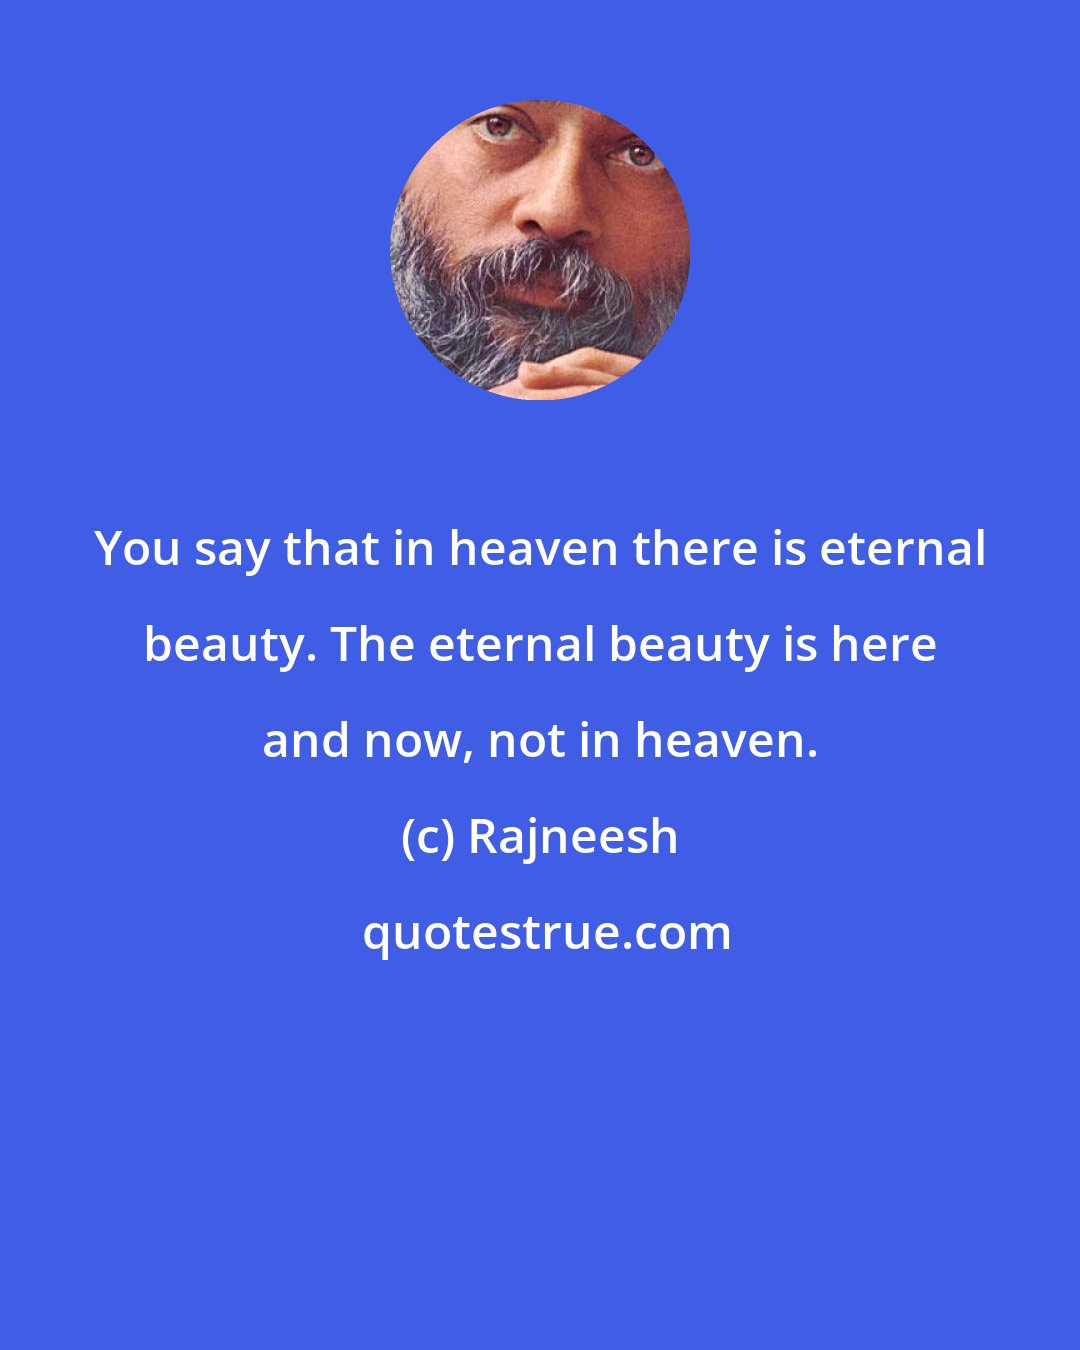 Rajneesh: You say that in heaven there is eternal beauty. The eternal beauty is here and now, not in heaven.